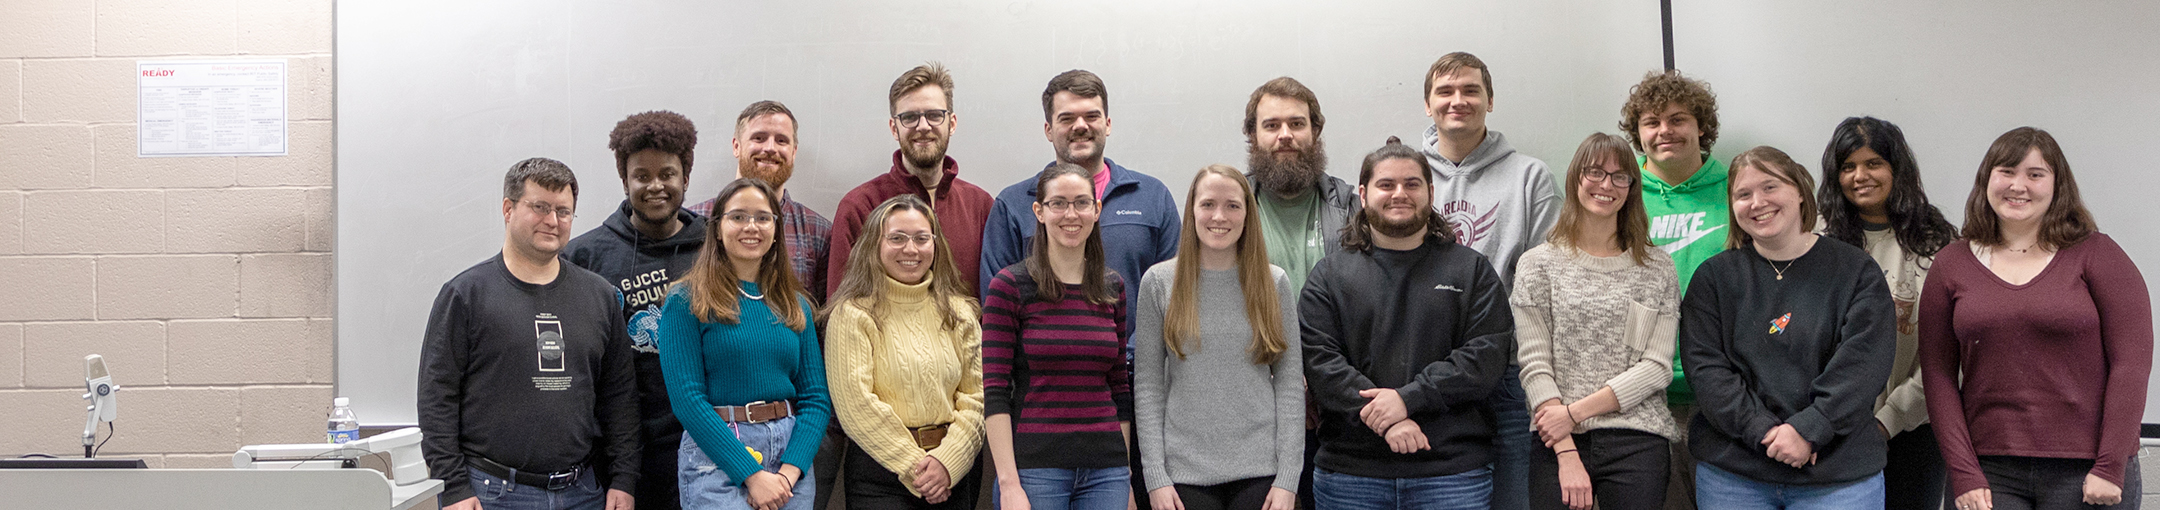 group shot of mathematical modeling students